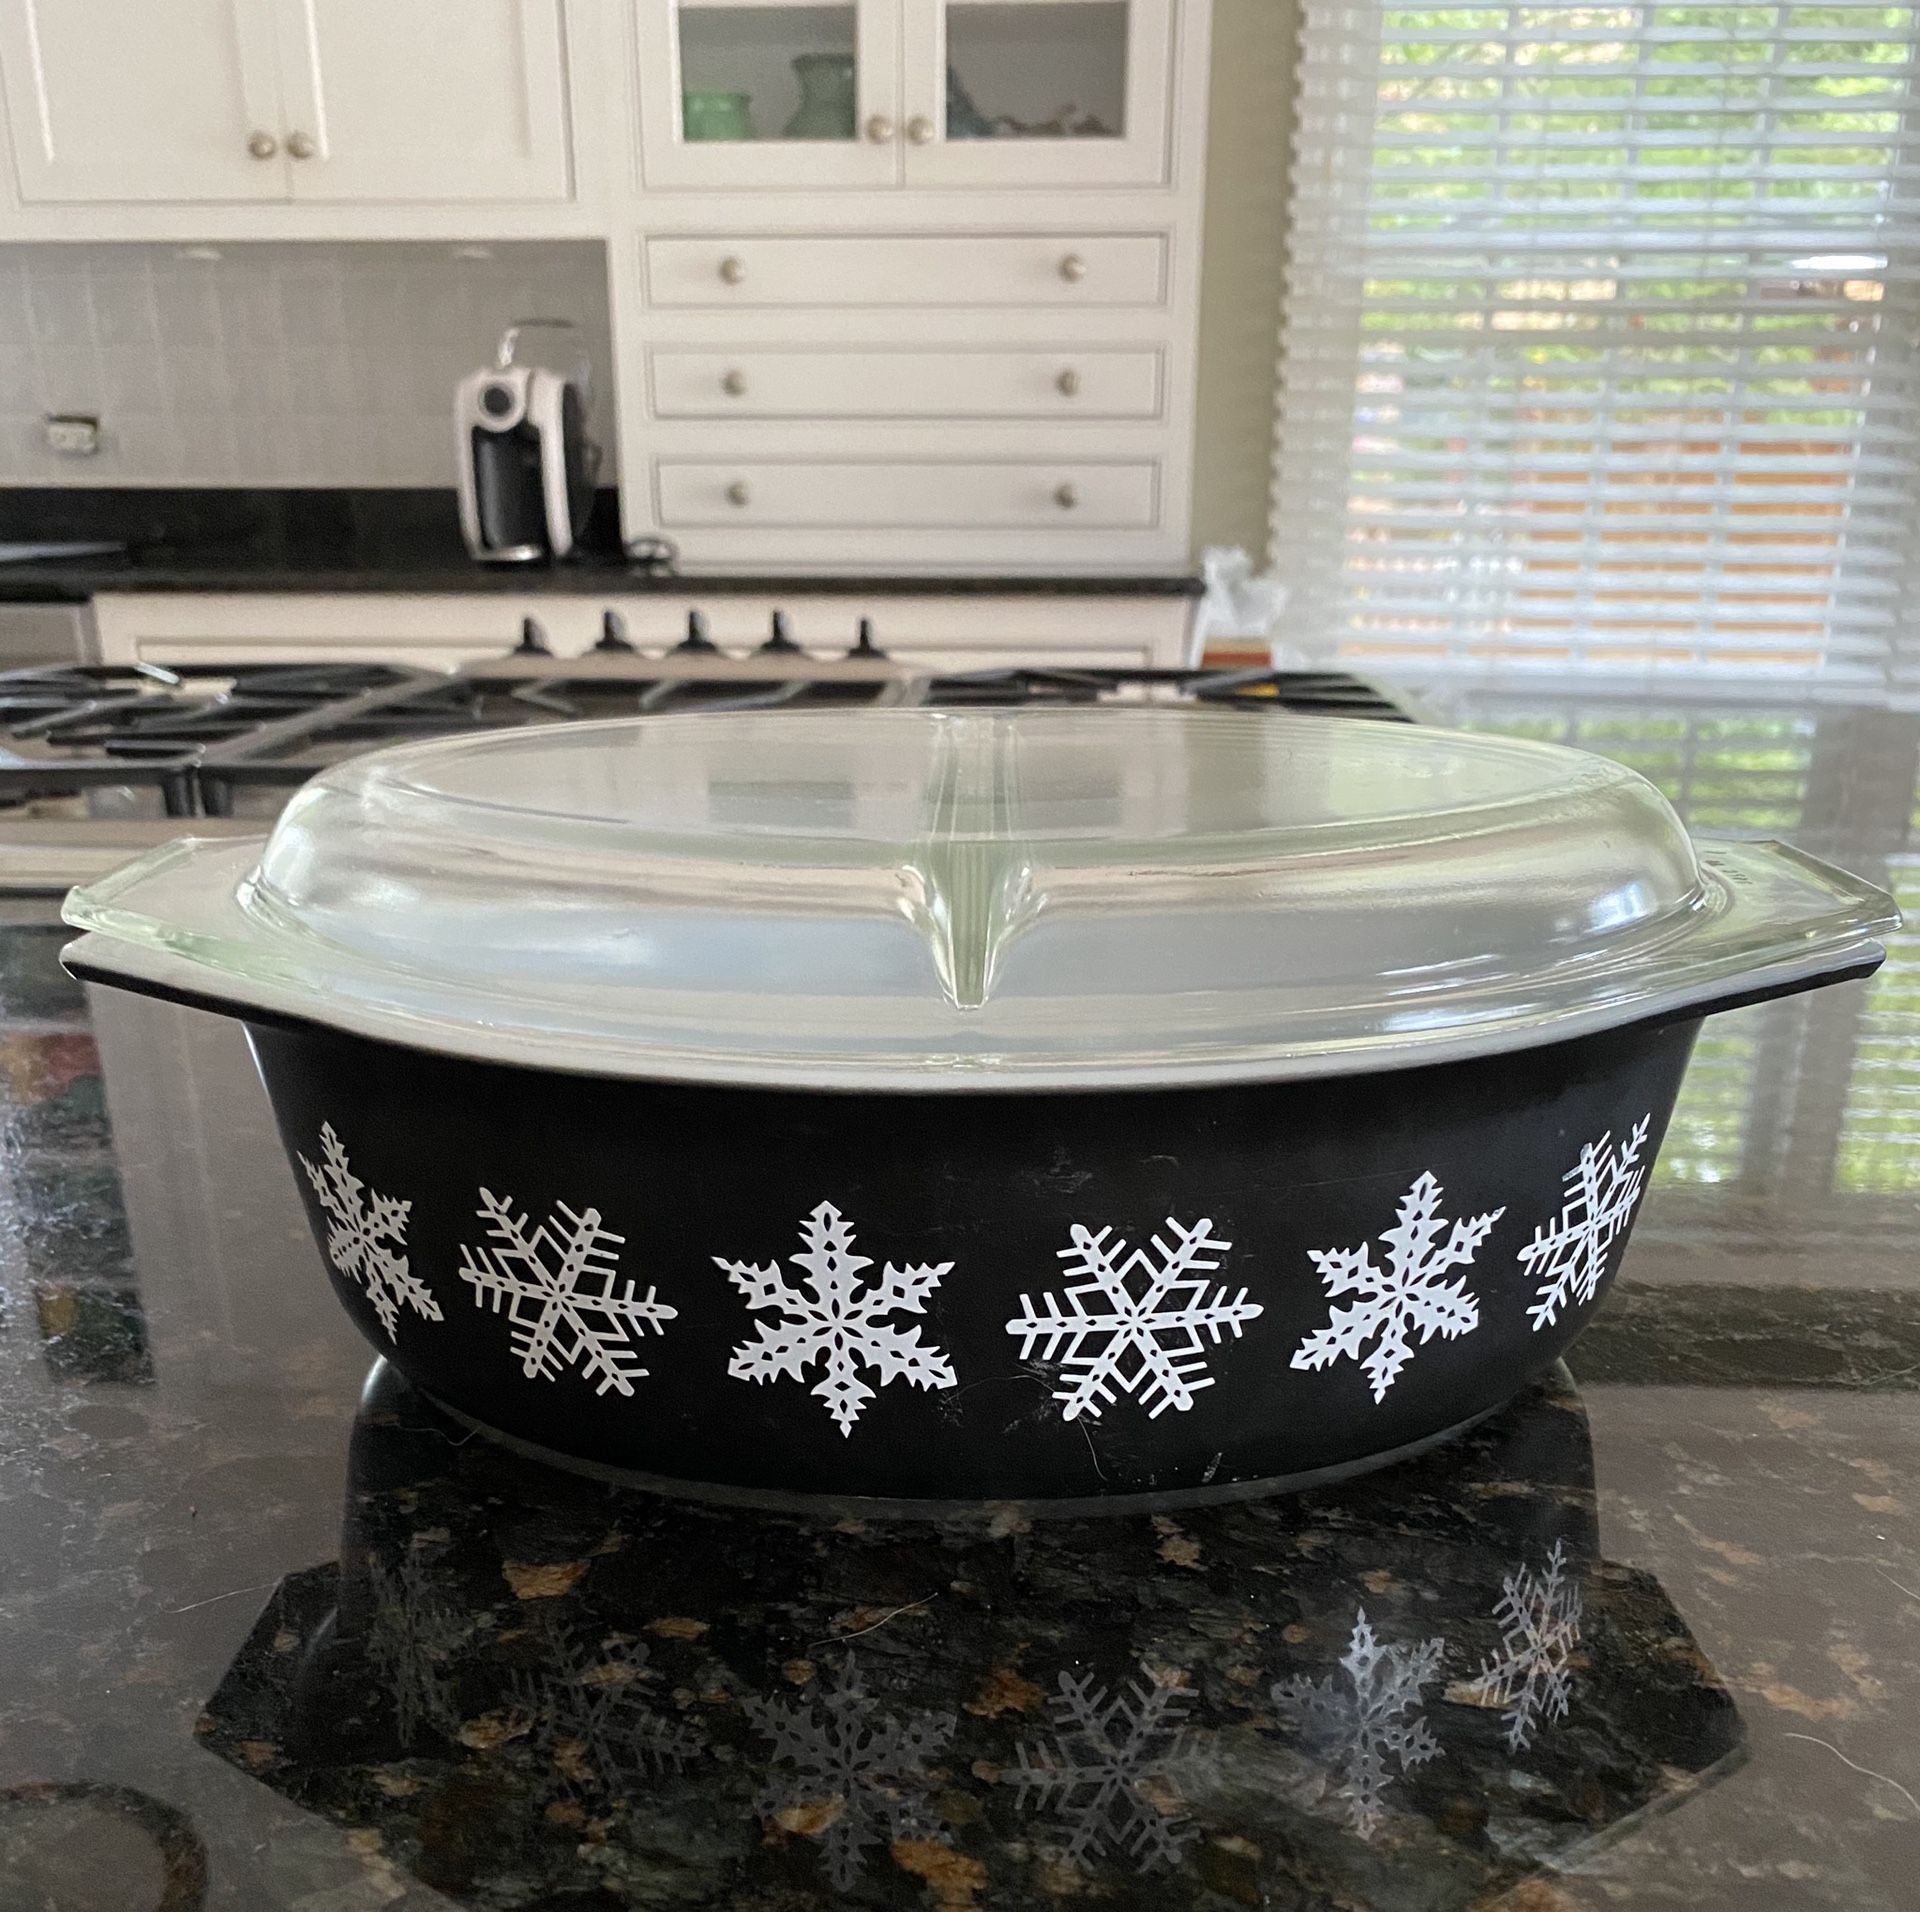 Pyrex 2.5 qrt Black with White Snowflakes with lid